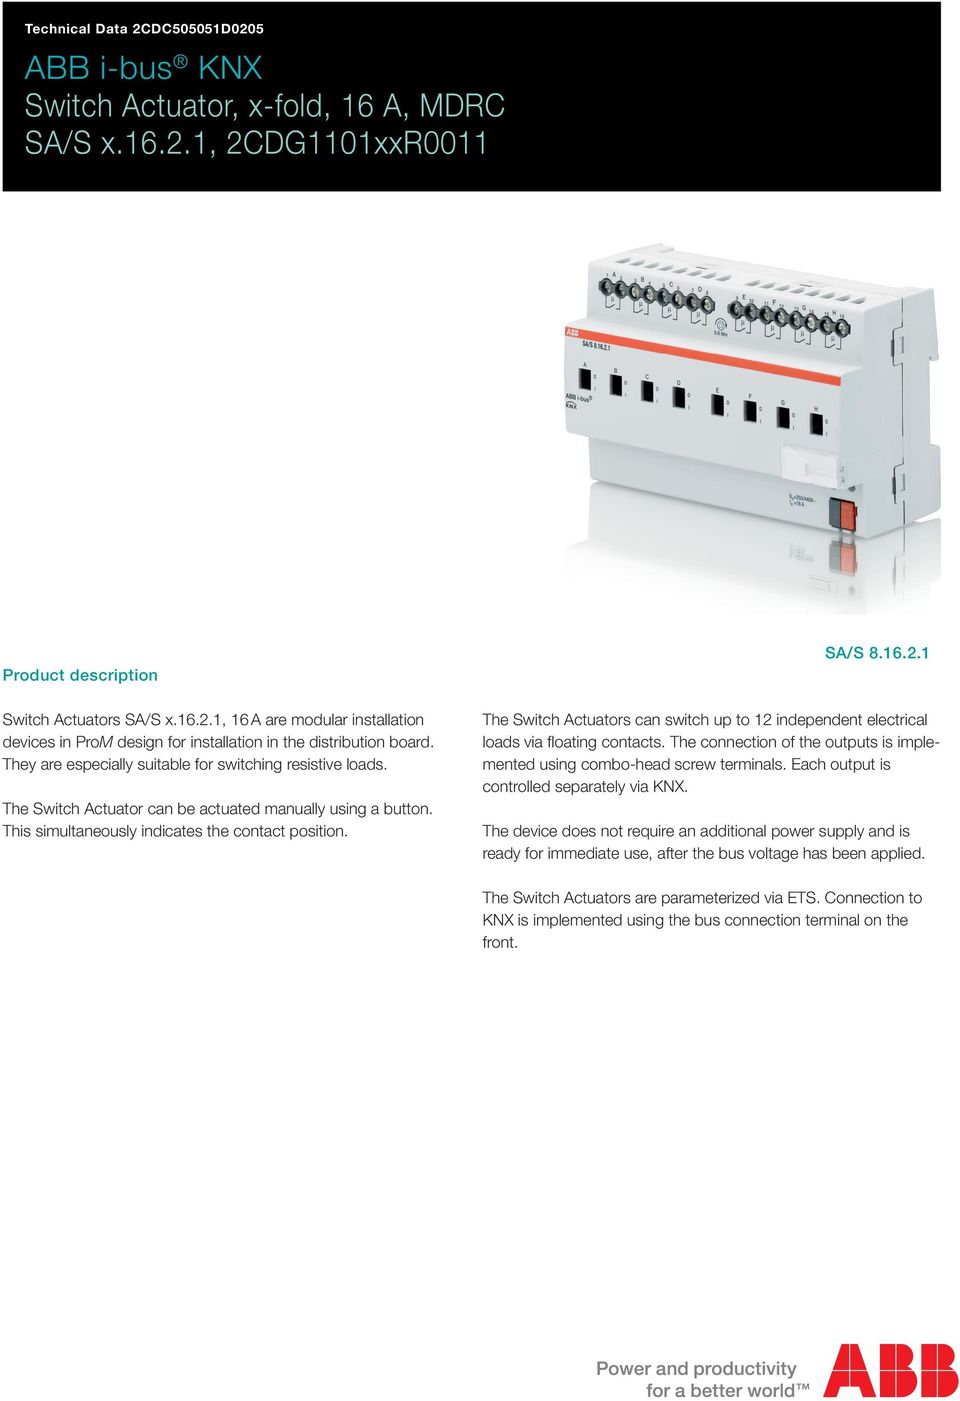 1 The Switch Actuators can switch up to 12 independent electrical loads via floating contacts. The connection of the outputs is implemented using combo-head screw terminals.